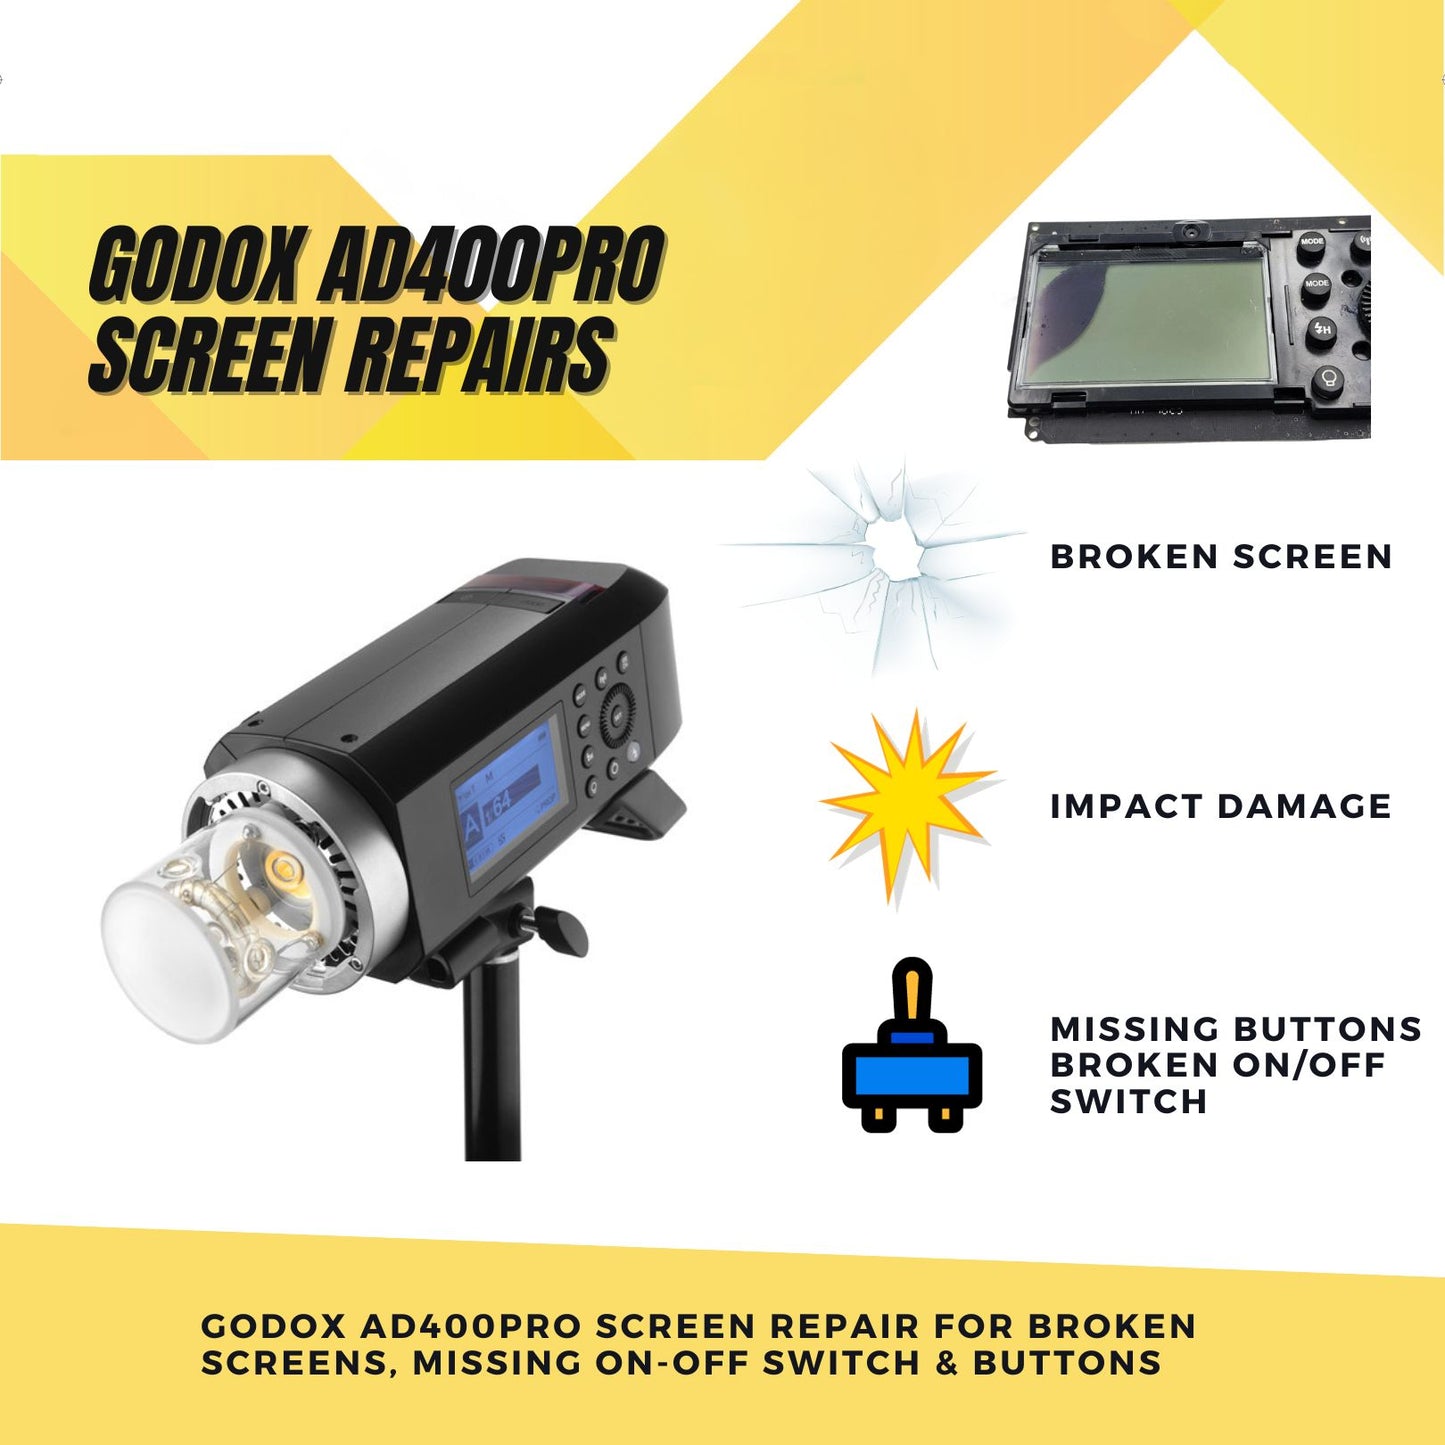 Repair Godox AD400PRO: Cracked or Blank LCD Screen